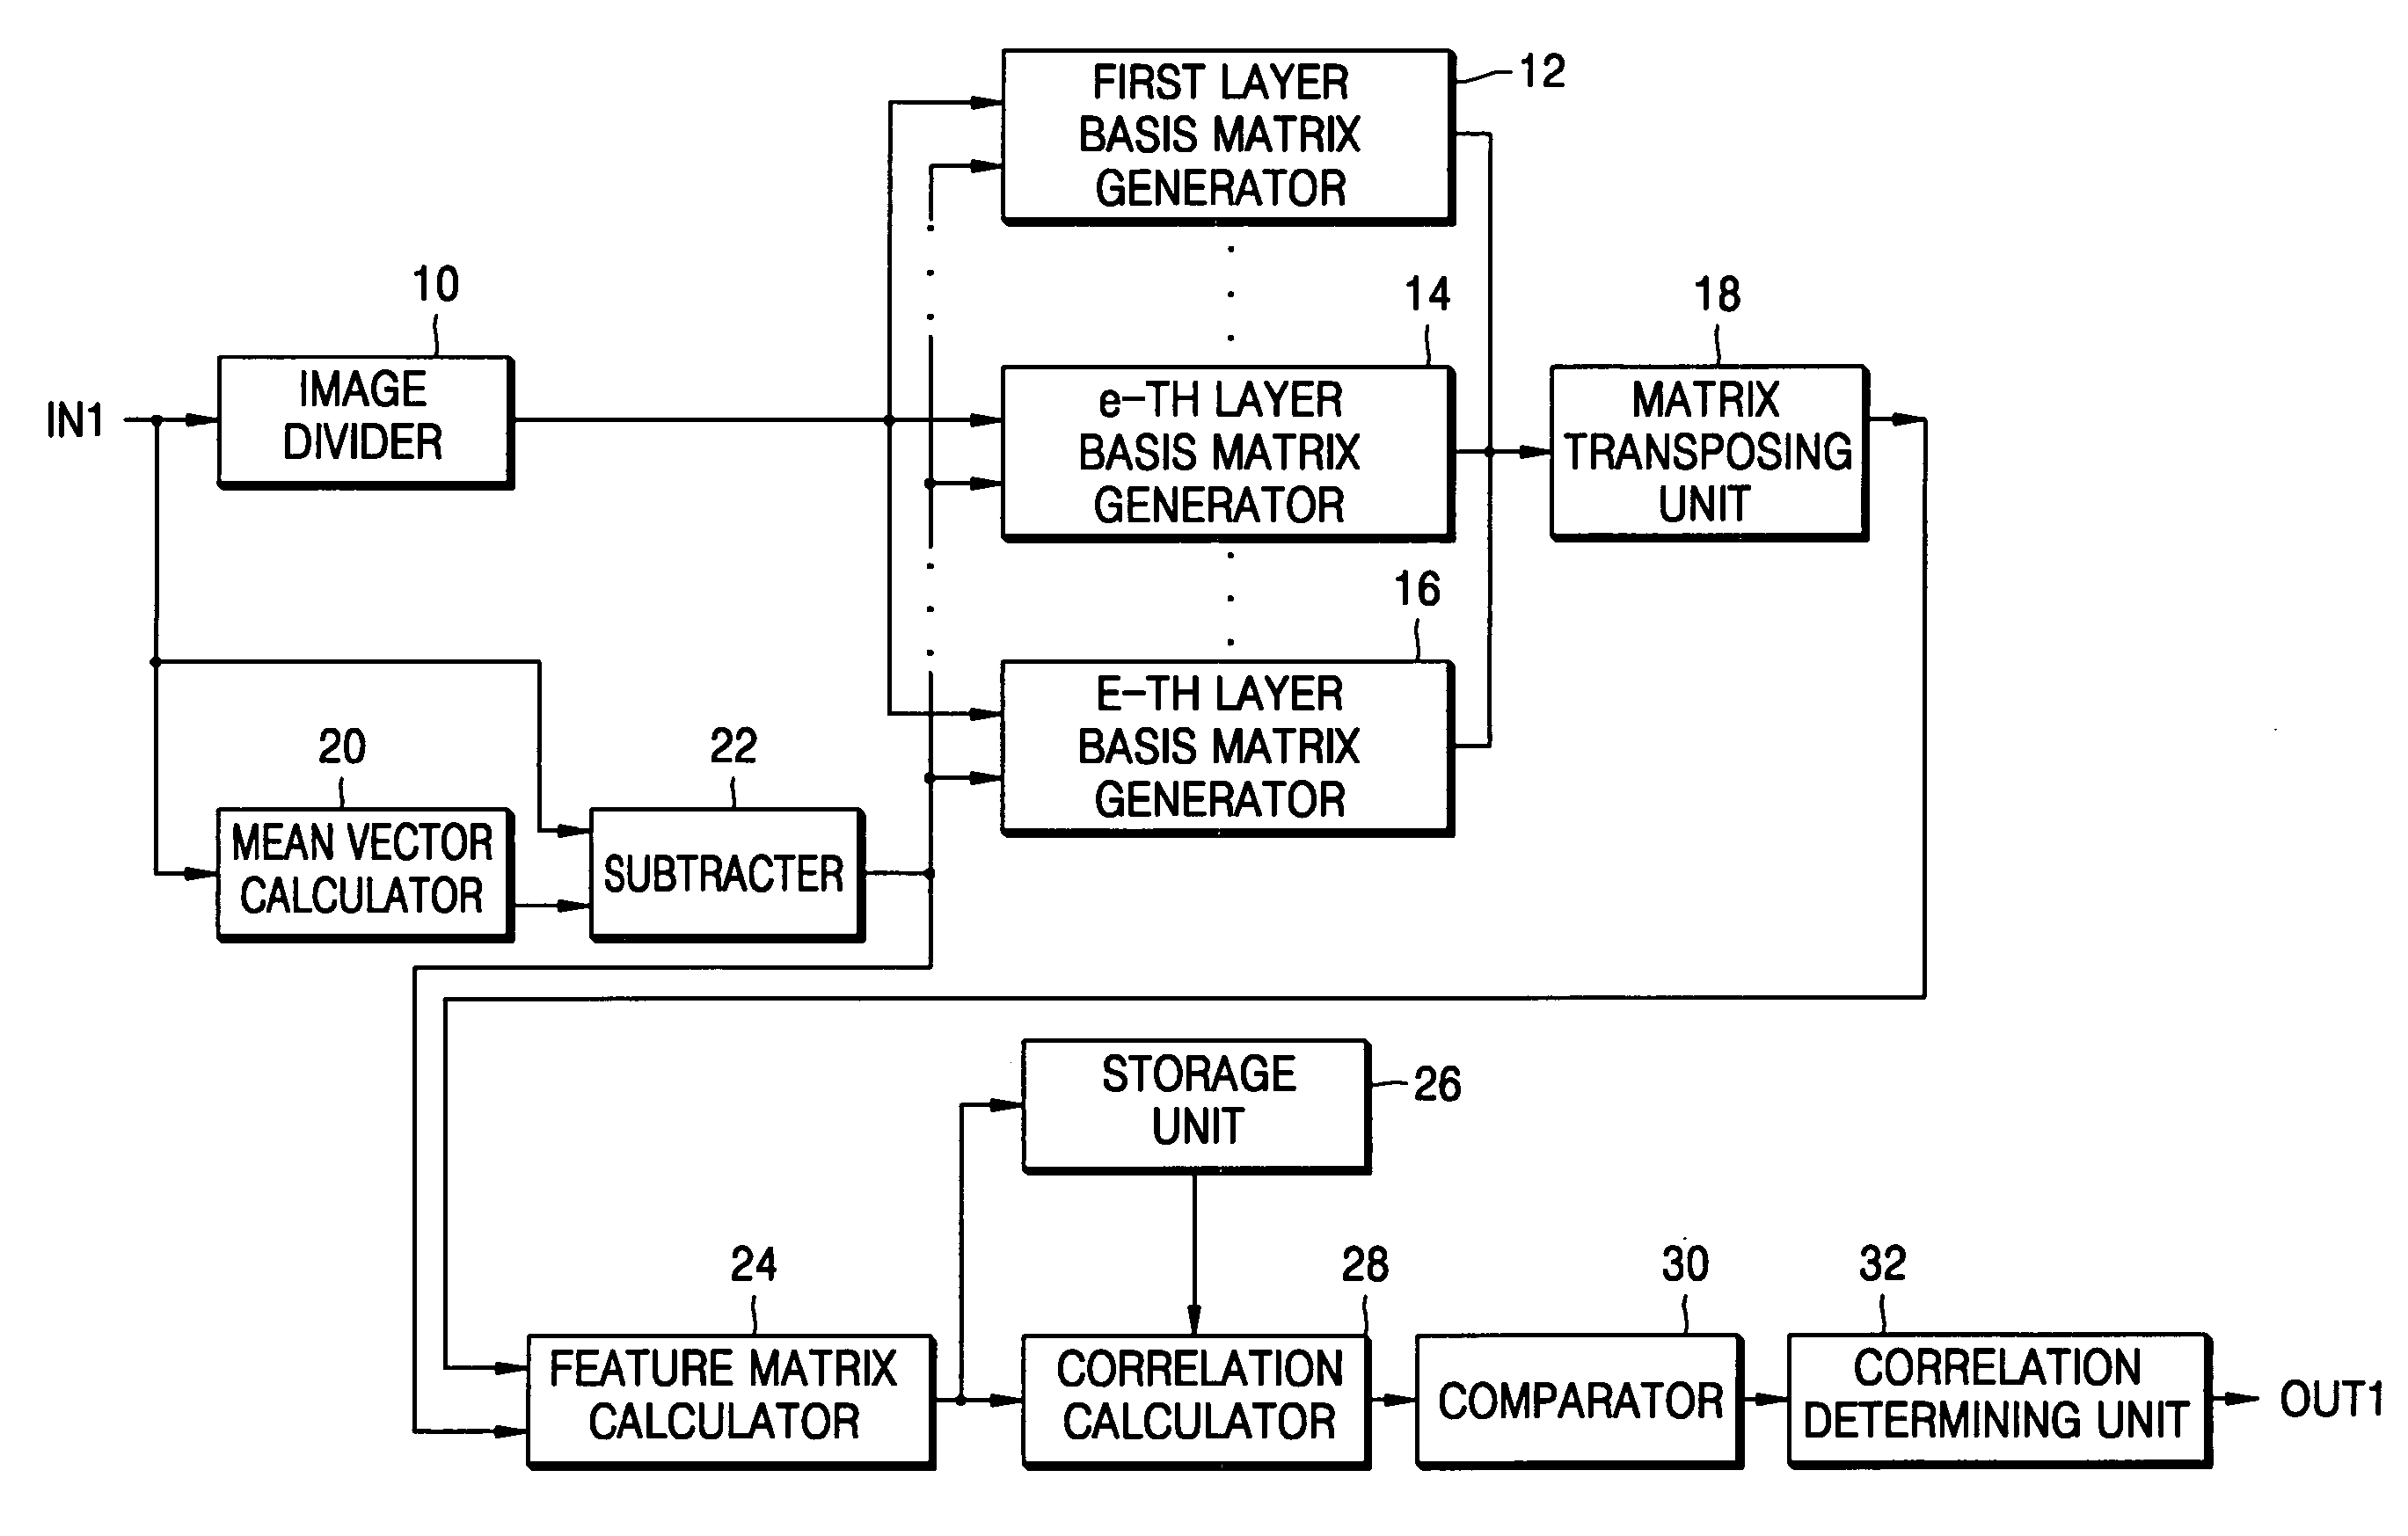 Apparatus and method for processing image based on layers